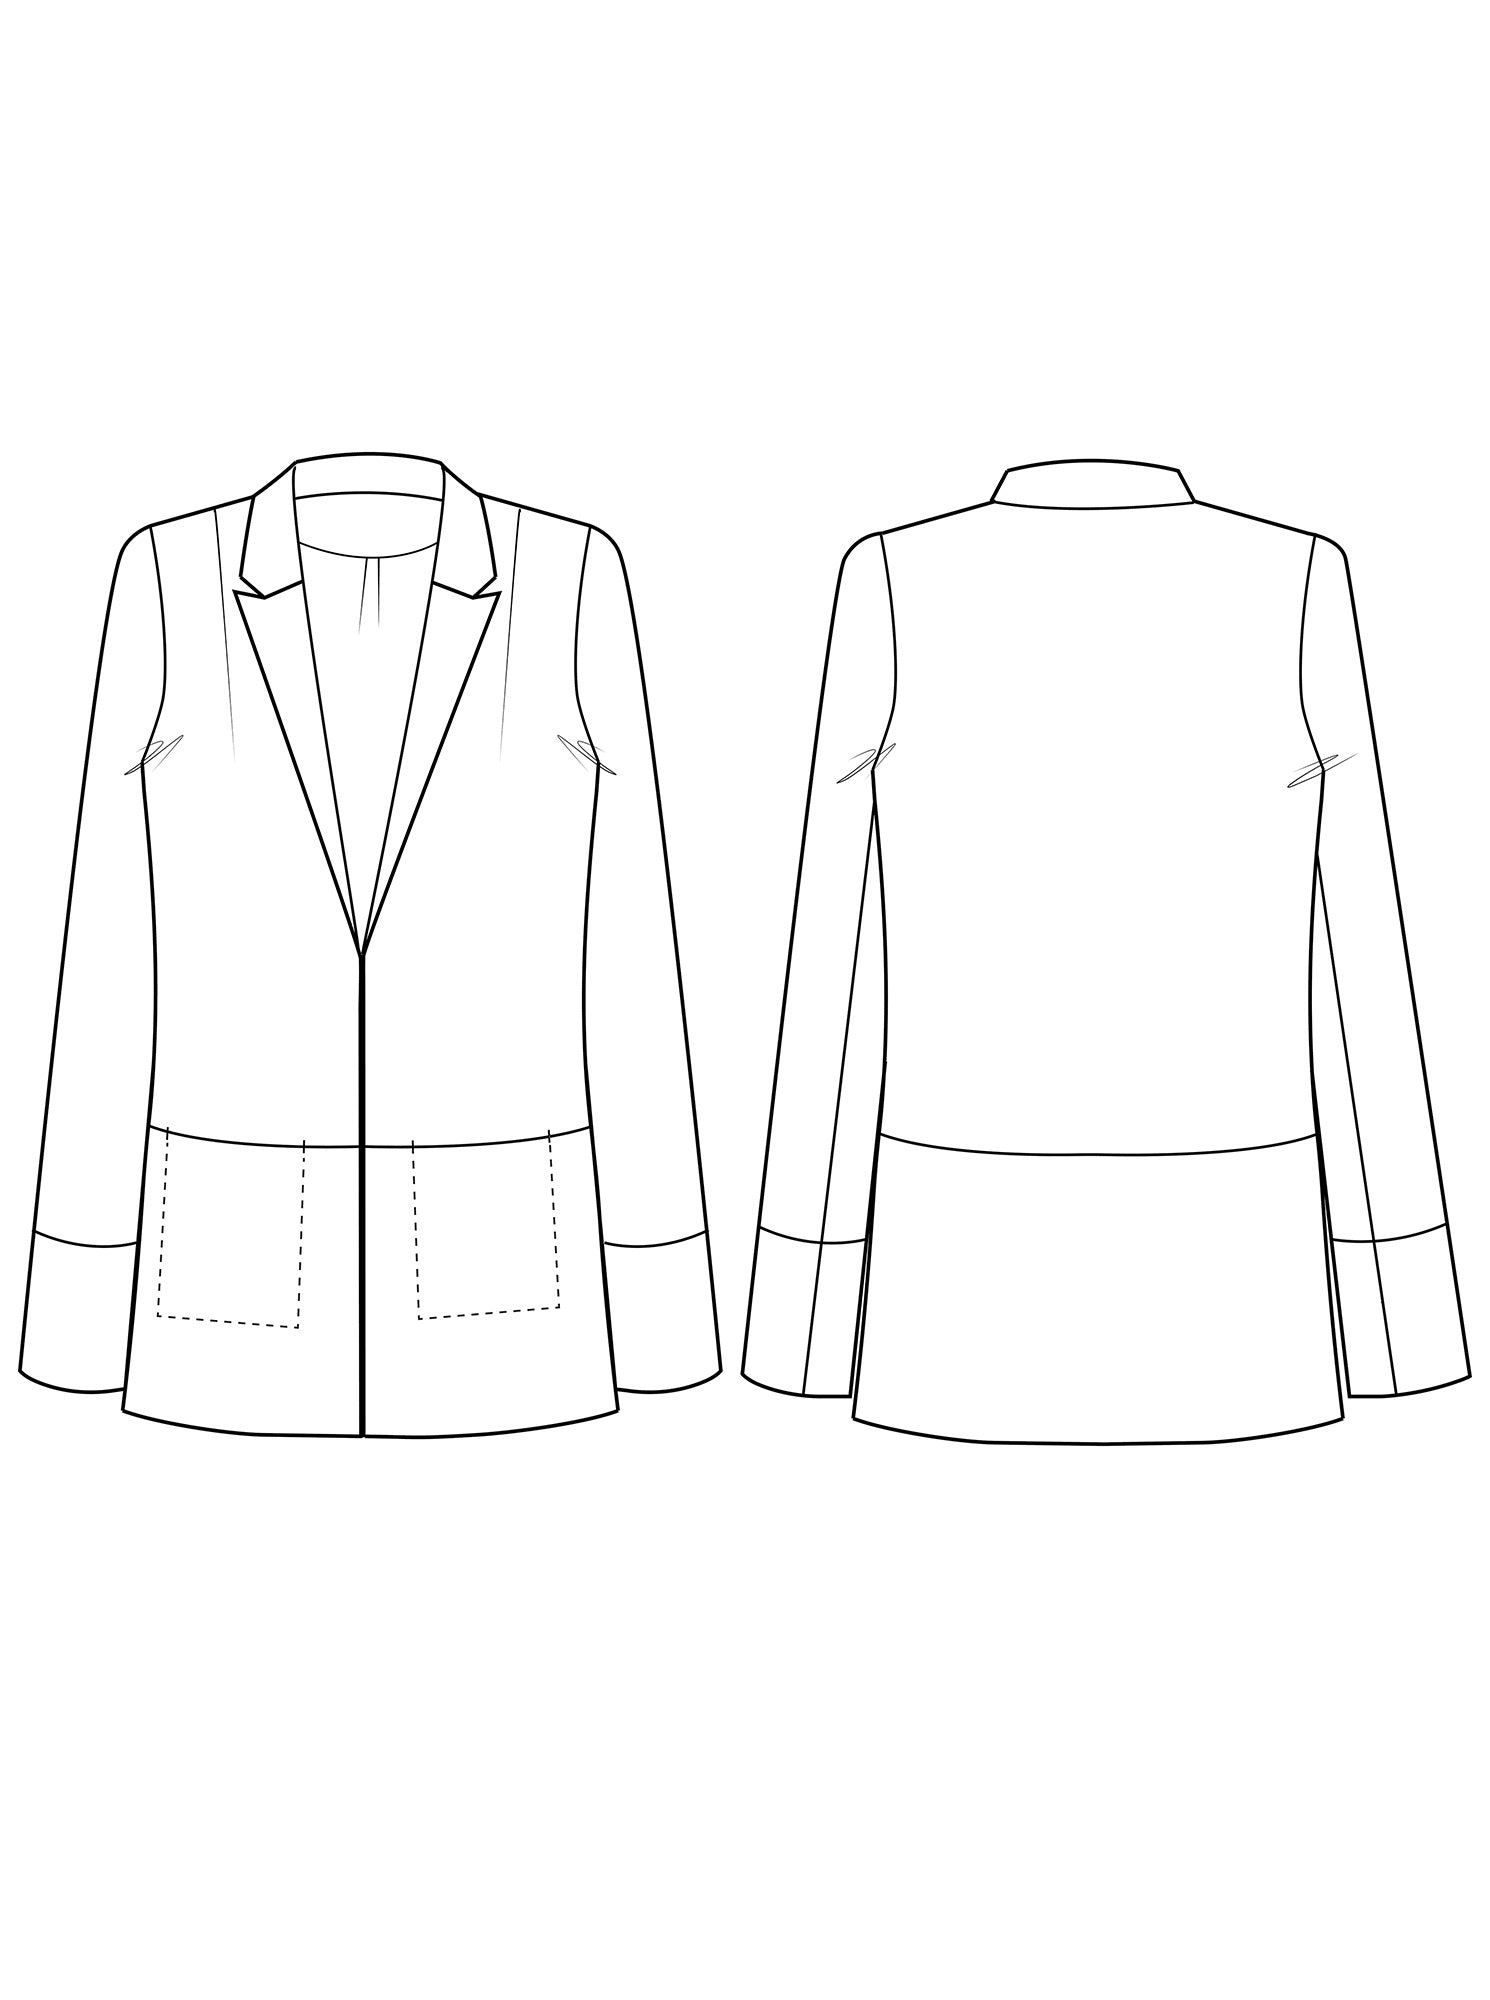 THE AVID SEAMSTRESS • The Blazer Sewing Pattern – The Draper's Daughter